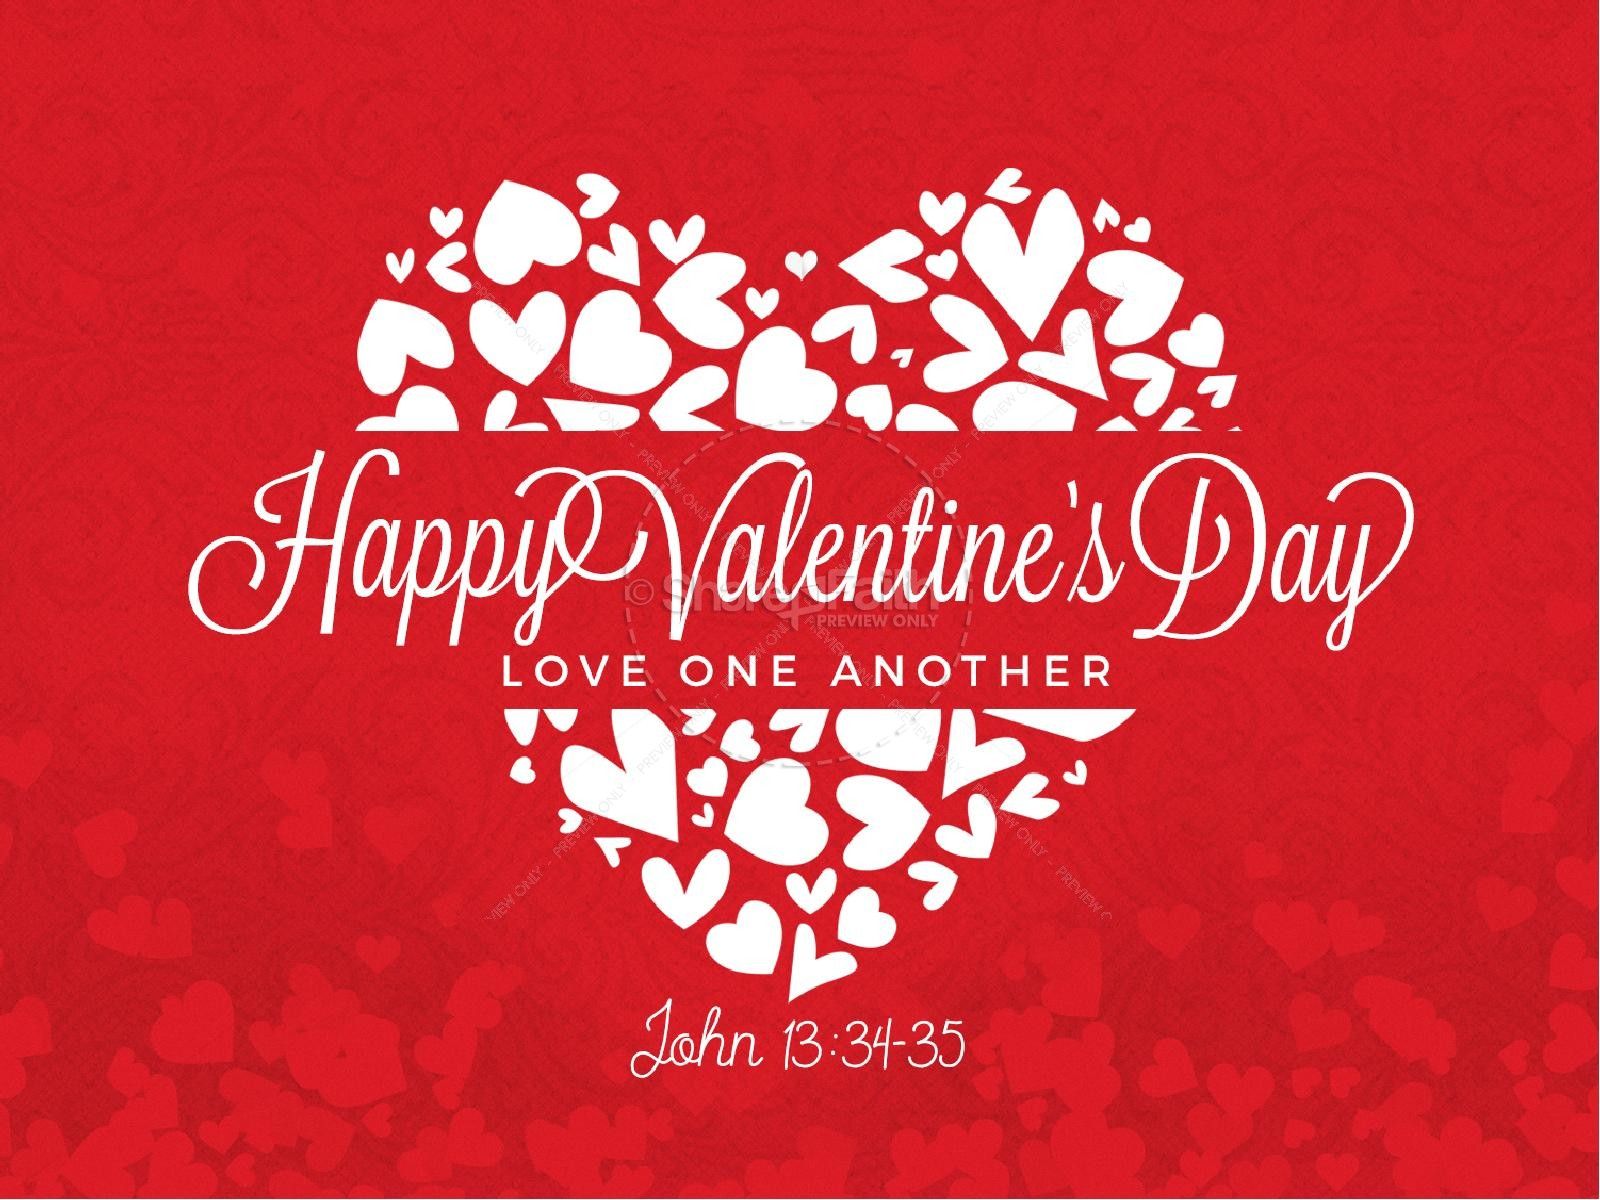 Happy Valentine's Day Love One Another Church Graphics